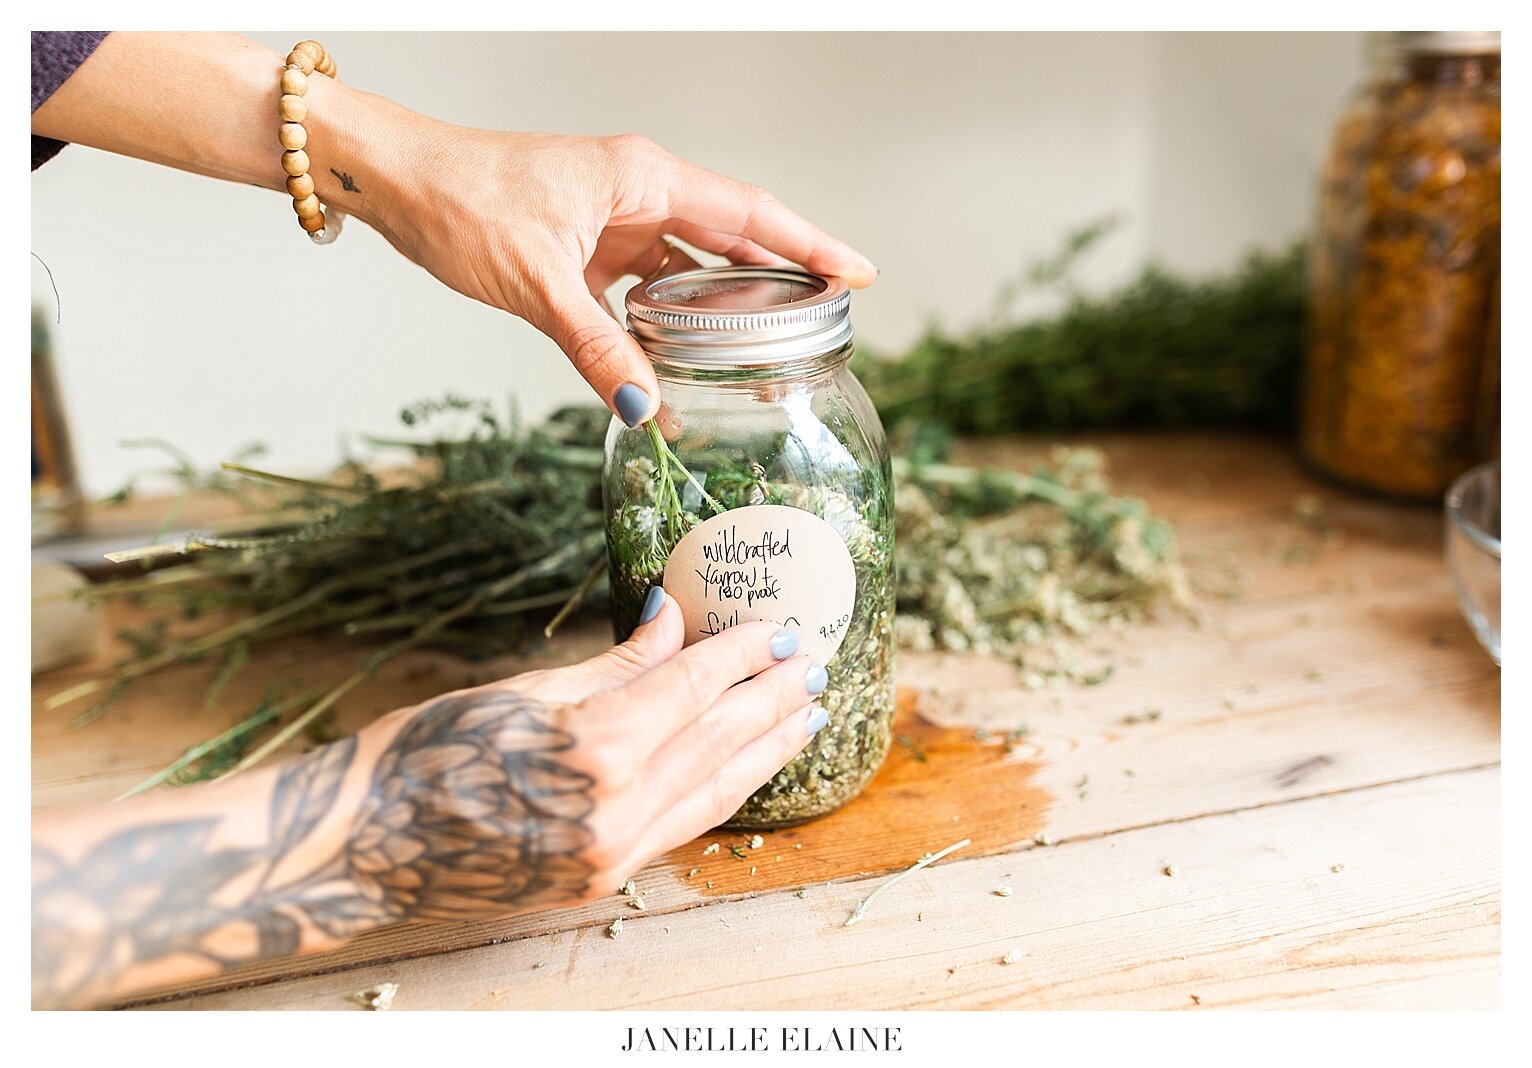 roots-revival-herbal-remedies-products-janelle-elaine-photography-houghton-michigan-50.jpg